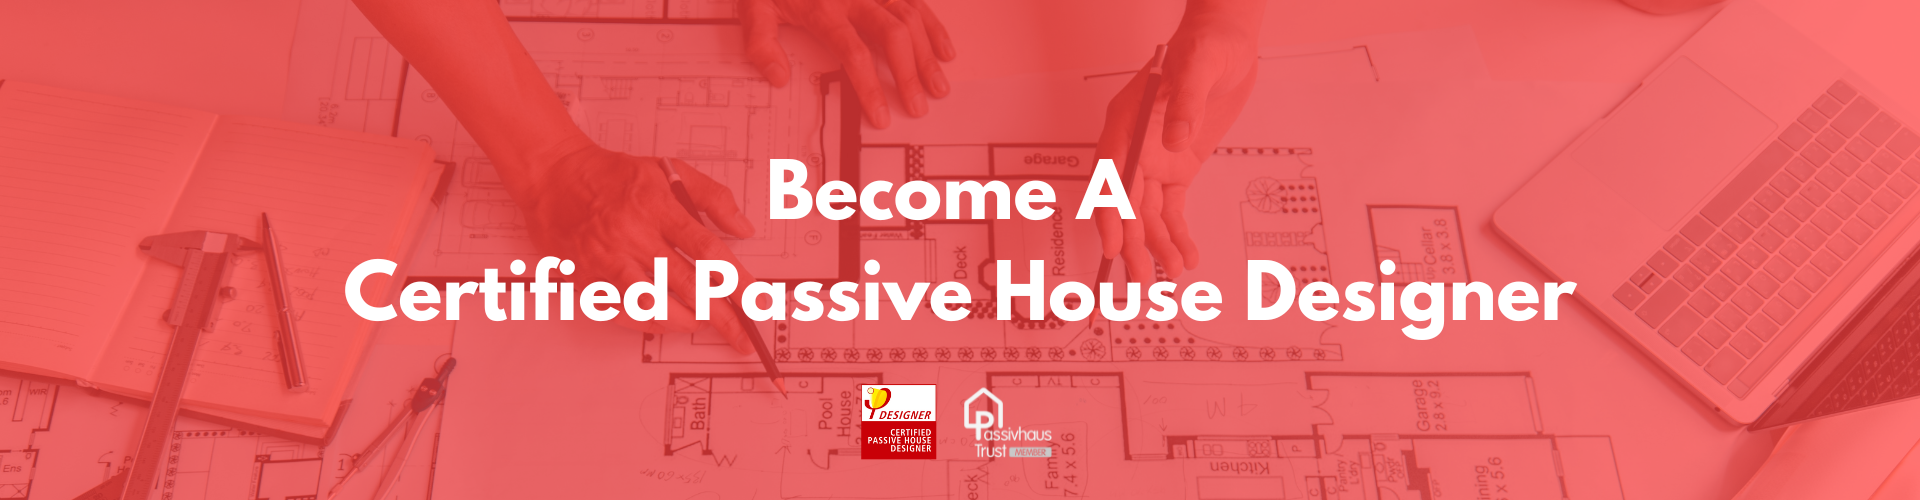 Become a Certified Passive House or Passivhaus Designer